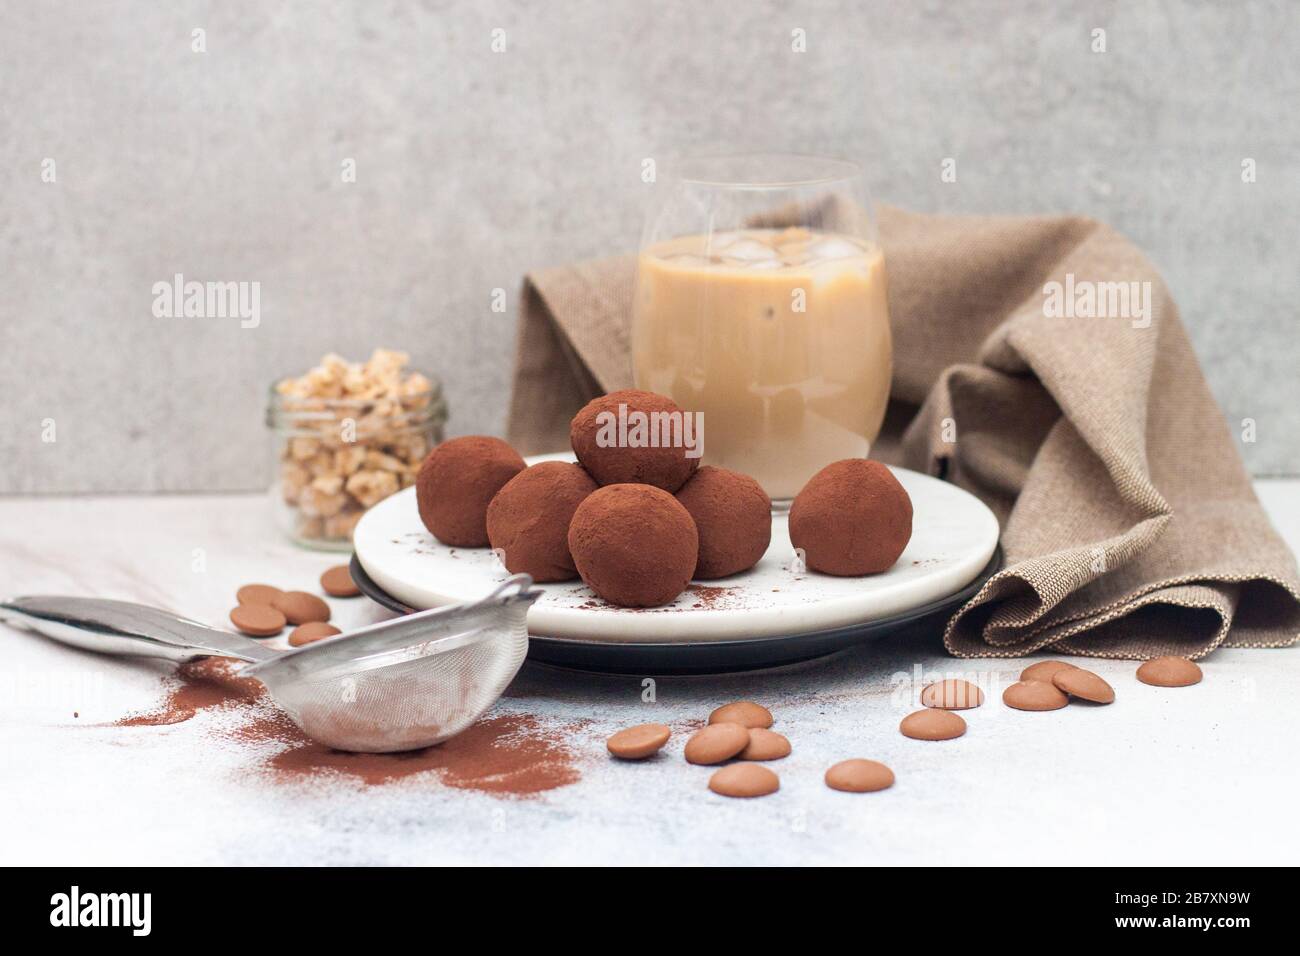 Cold coffee liqueur with chocolate truffles, rolled in cocoa powder on grey background Stock Photo